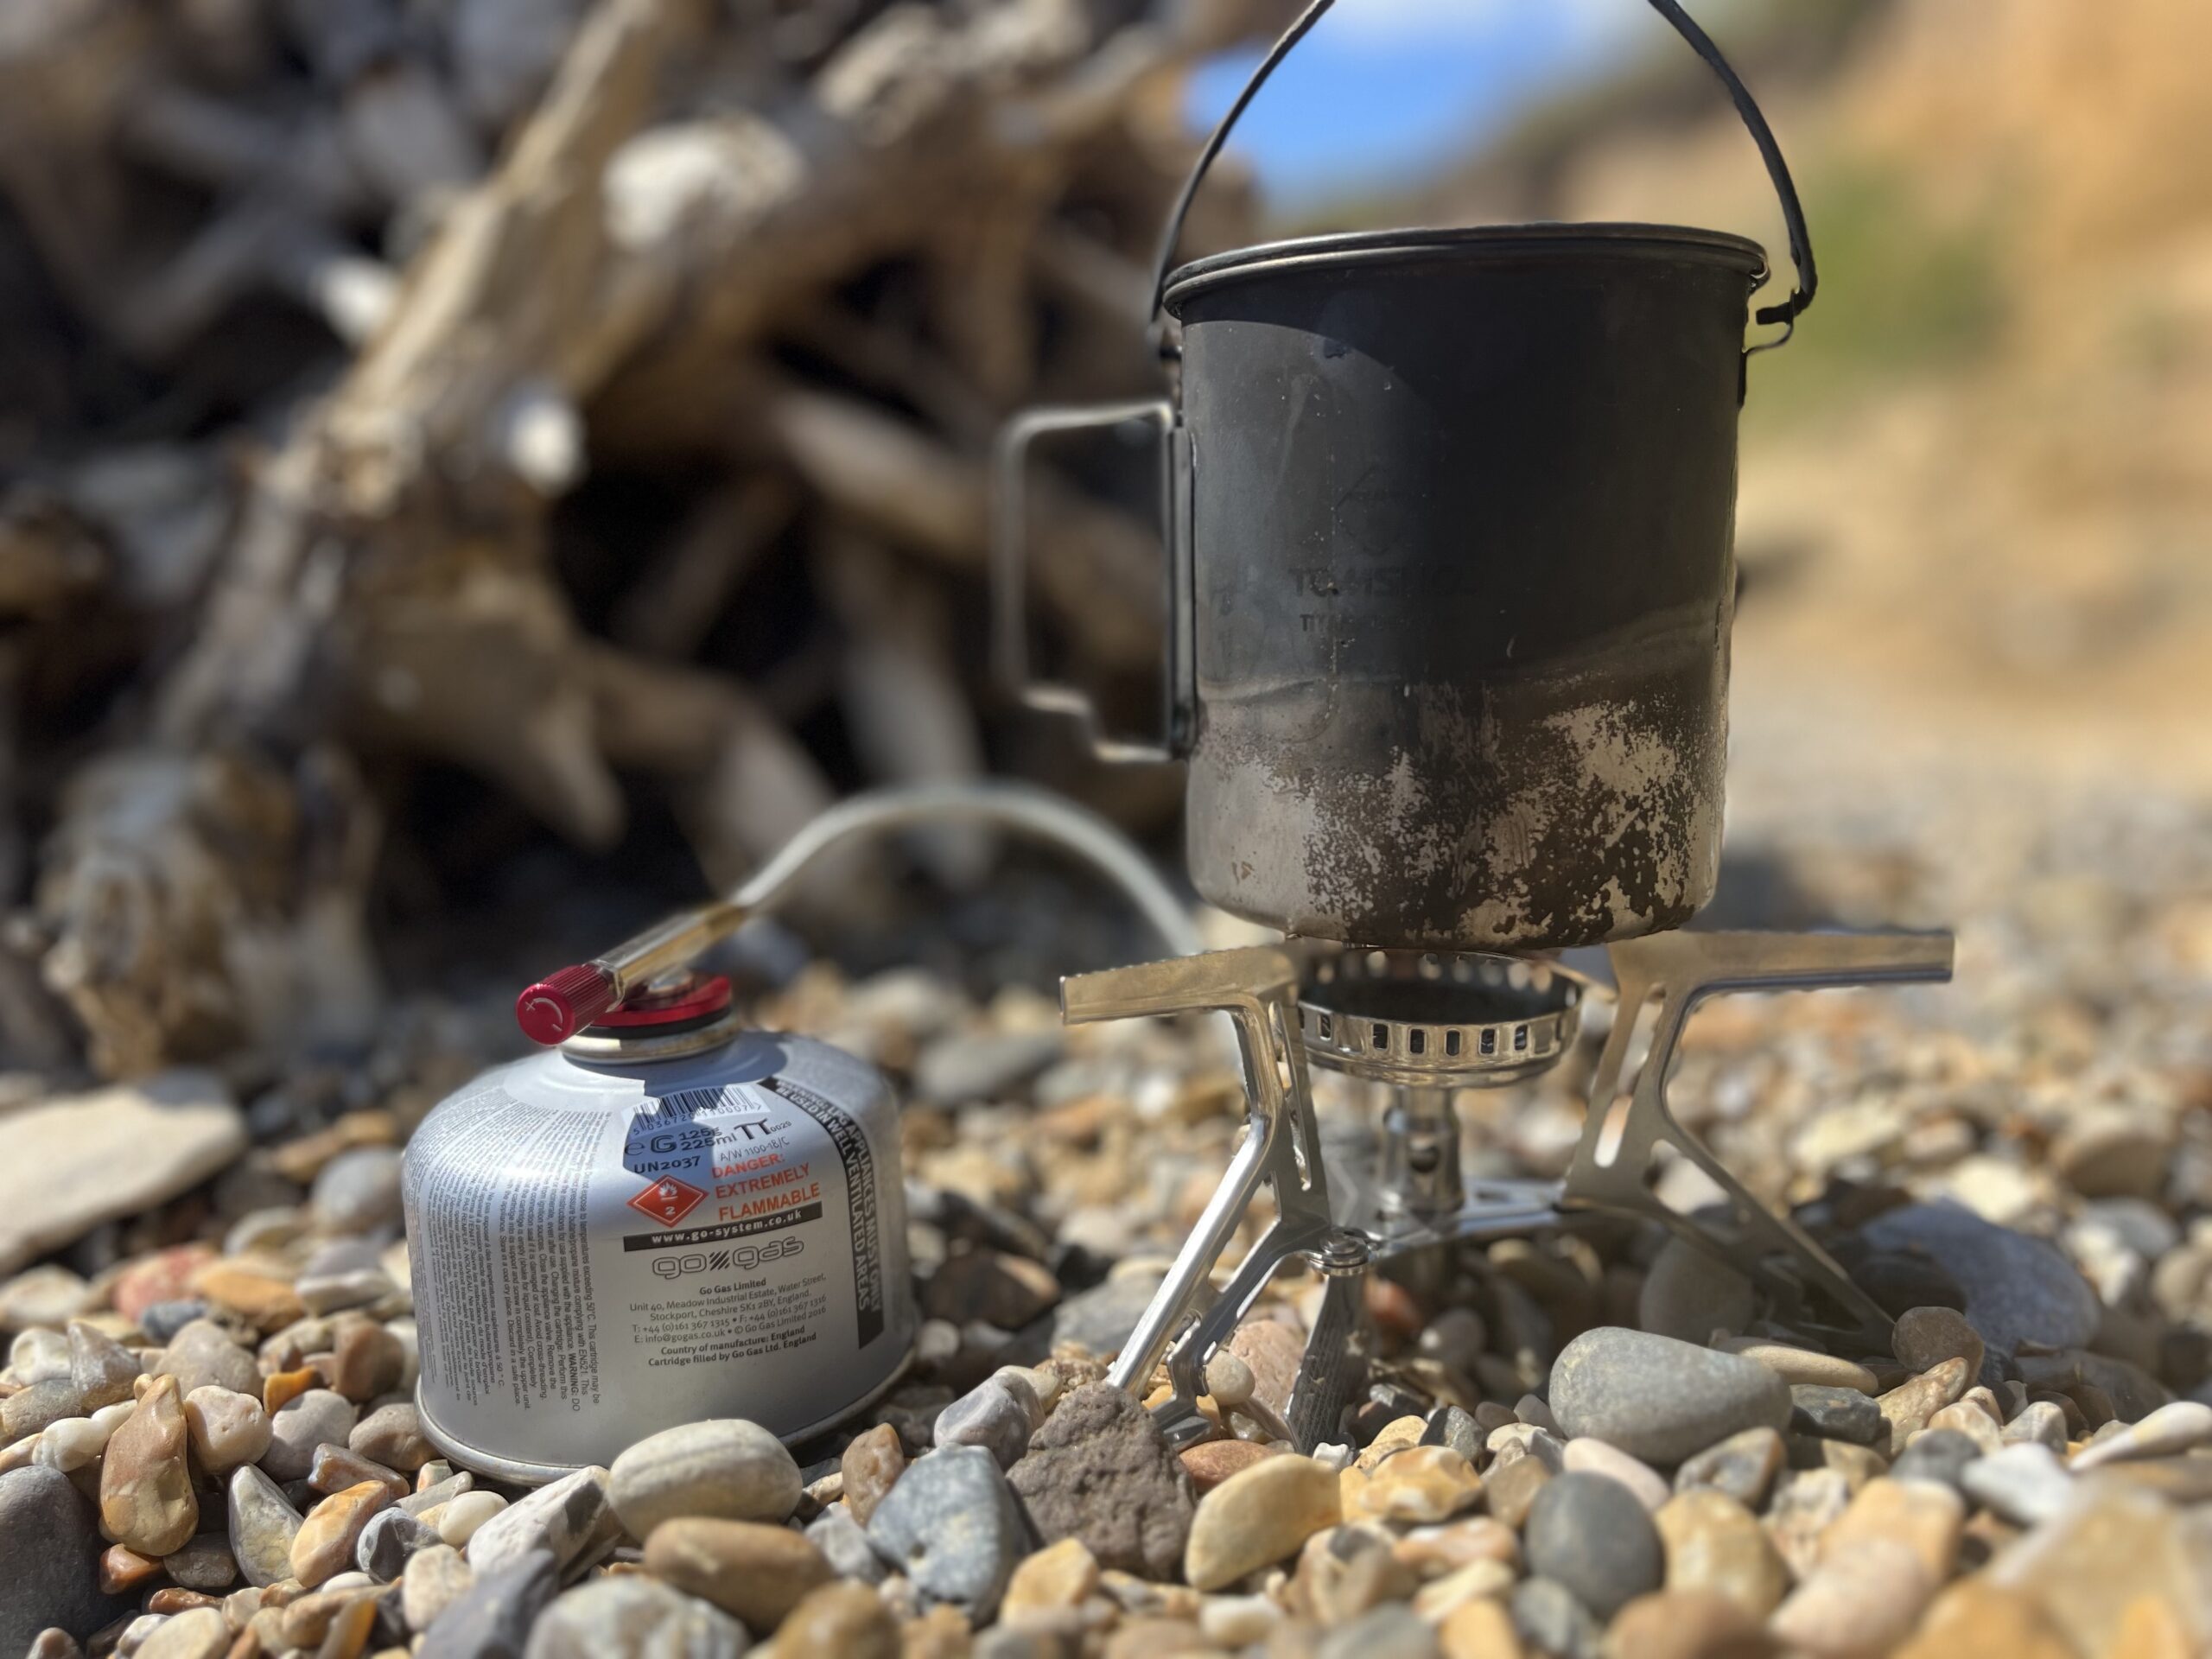 Fjern Brenner Stove: A Compact Outdoor Cooking Solution. 